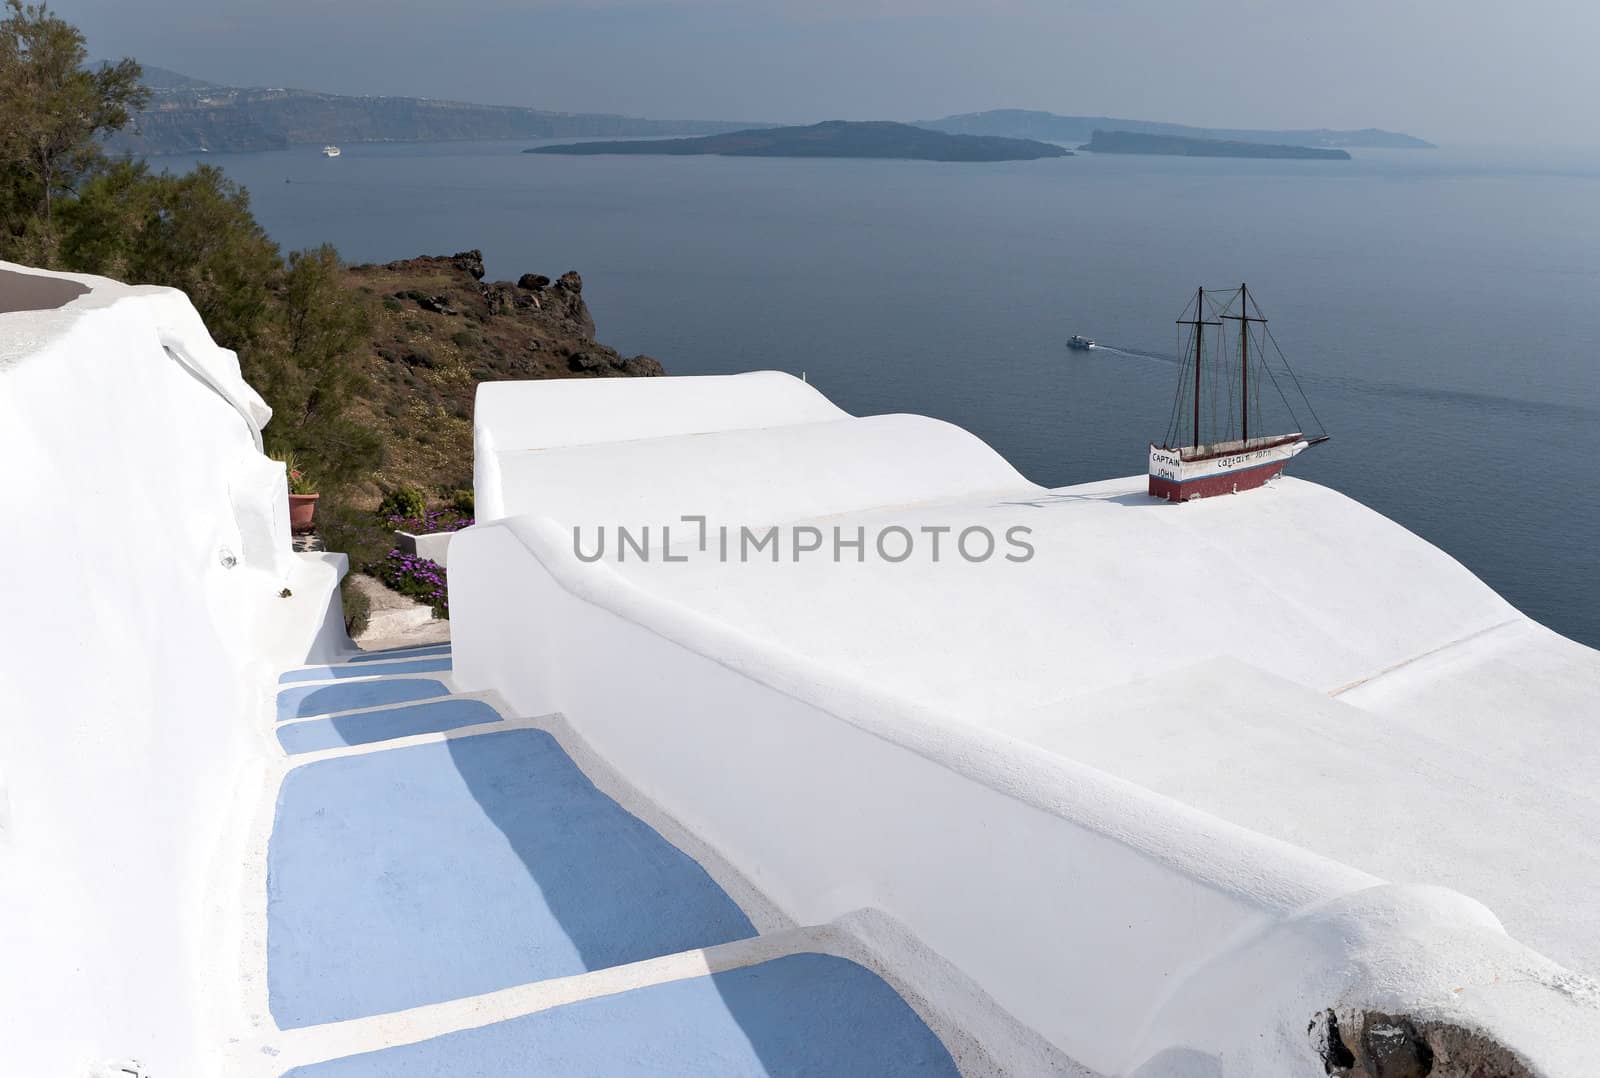 Caldera view in Santorini island with blue steps to the buildings on the cliff